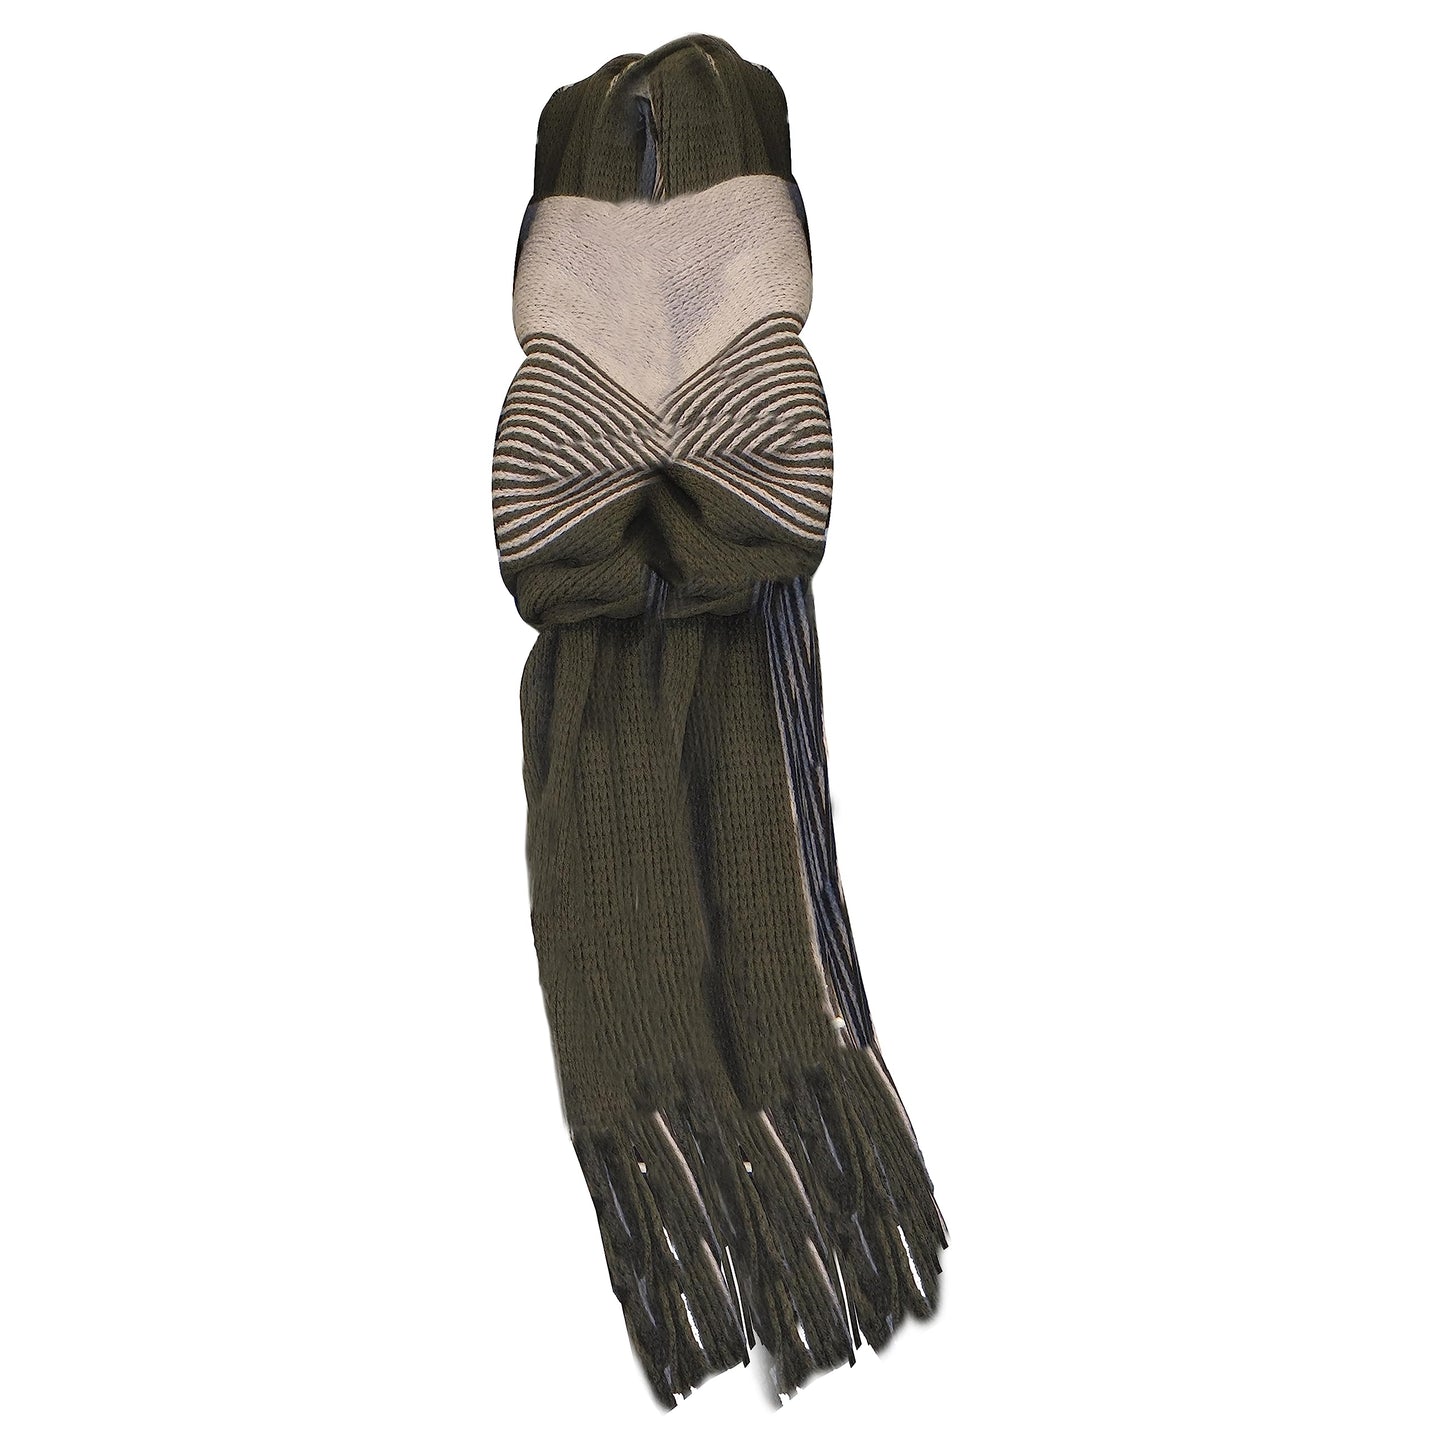 Men's Woven Scarves Stripe Design Soft Warm Multi Coloured Scarf. Buy now for £7.00. A Scarves by Sock Stack. accessories, accessory, black, charcoal, Colours, comfortable, cream, gift, grey, indoor, insulation, mens, Multi, Out of stock, outdoor, red, Sc